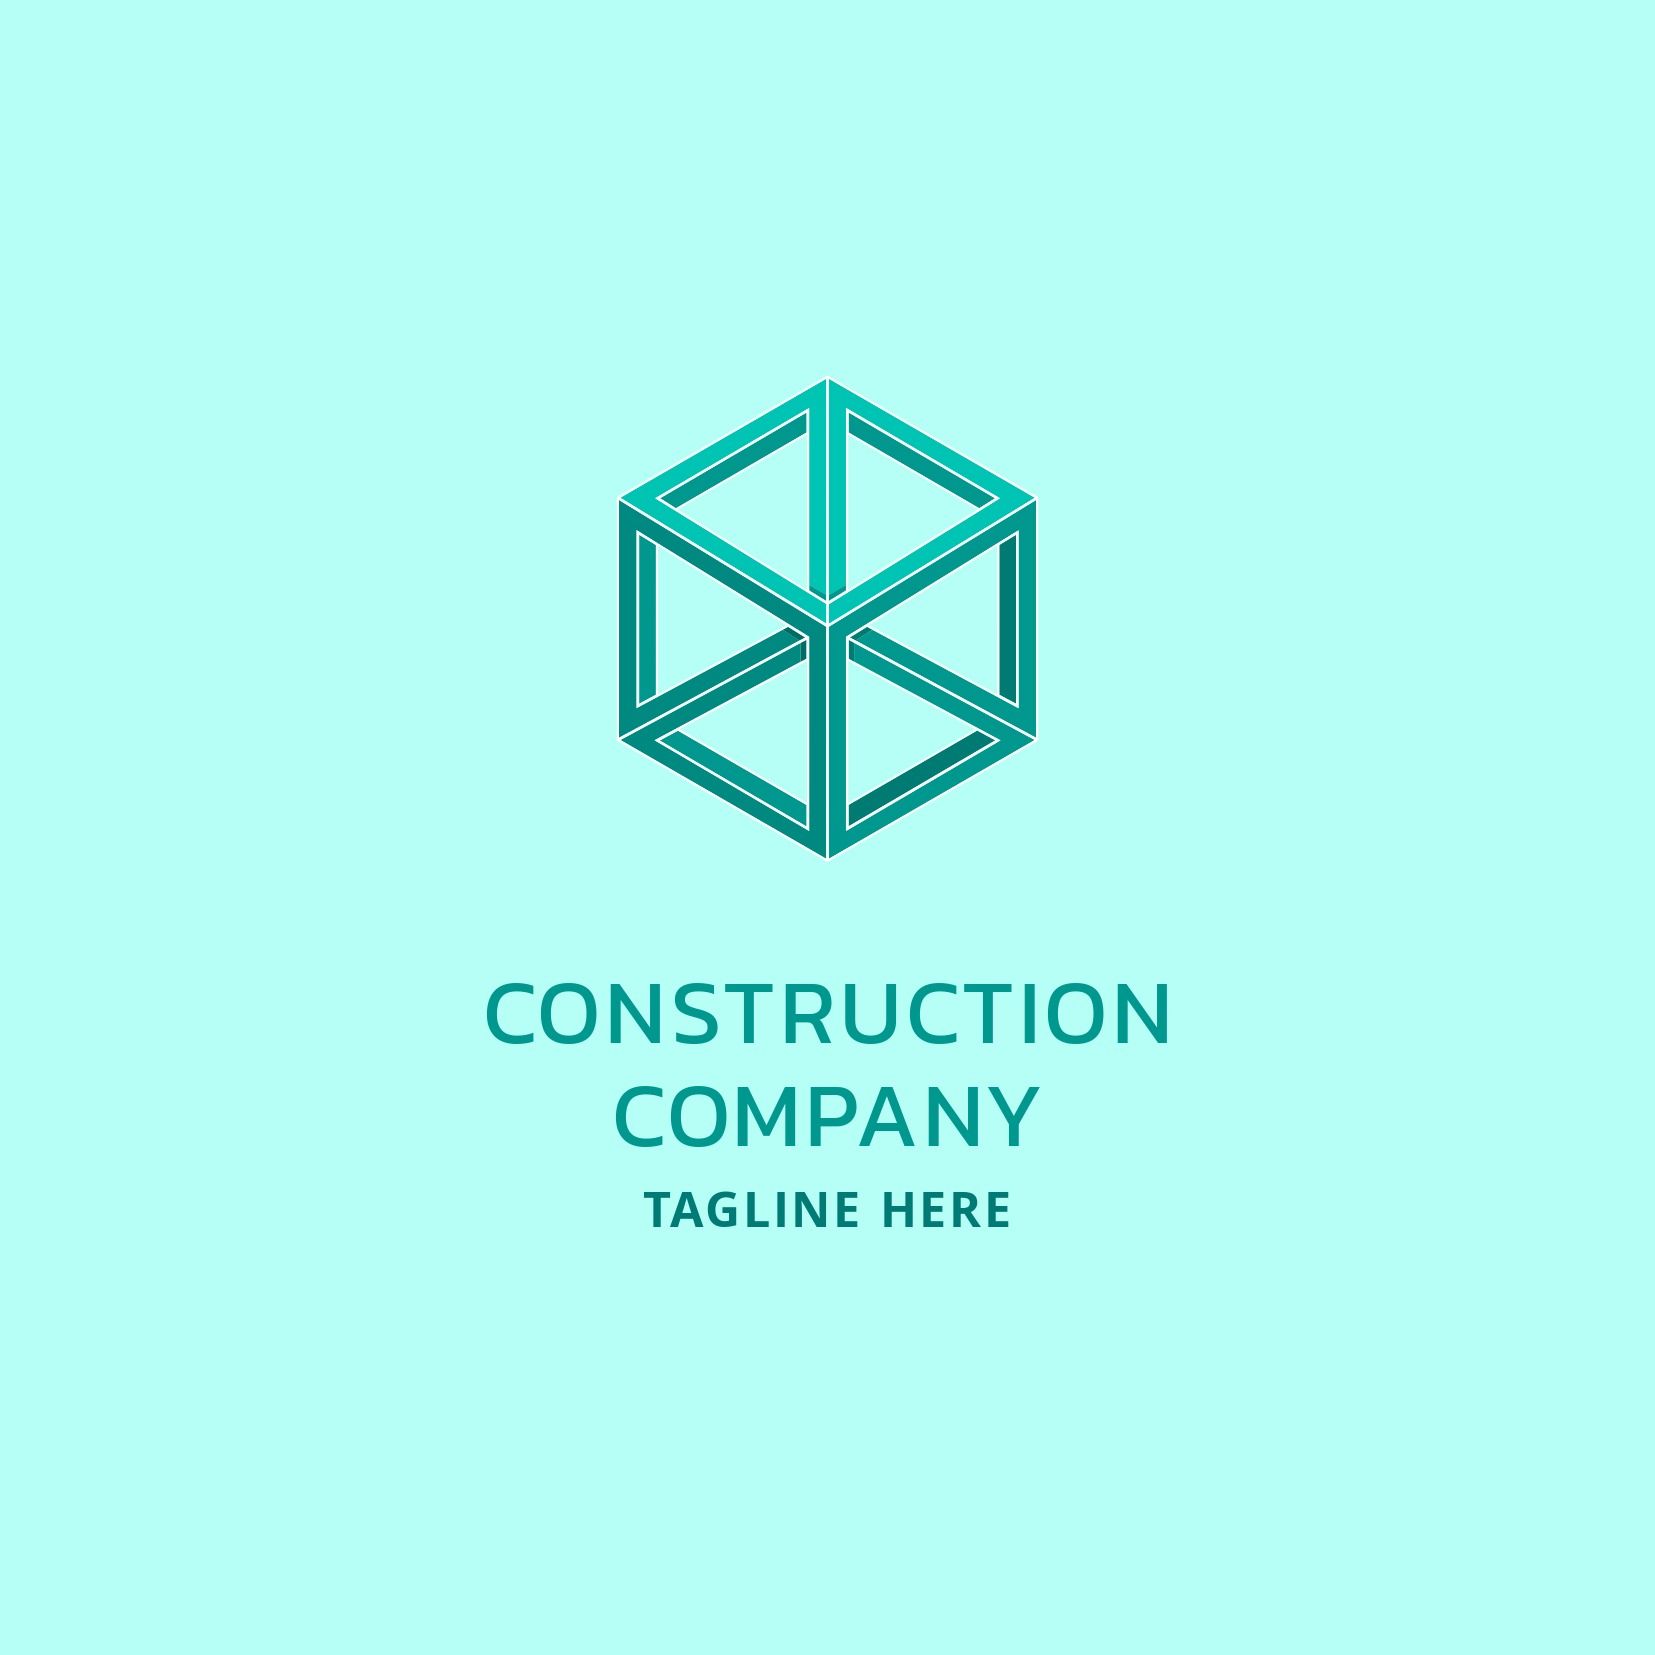 Construction company logo with a cubic frame over a turquoise background - Reduce letter spacing and give your logo a modern look with Kanit font - Image